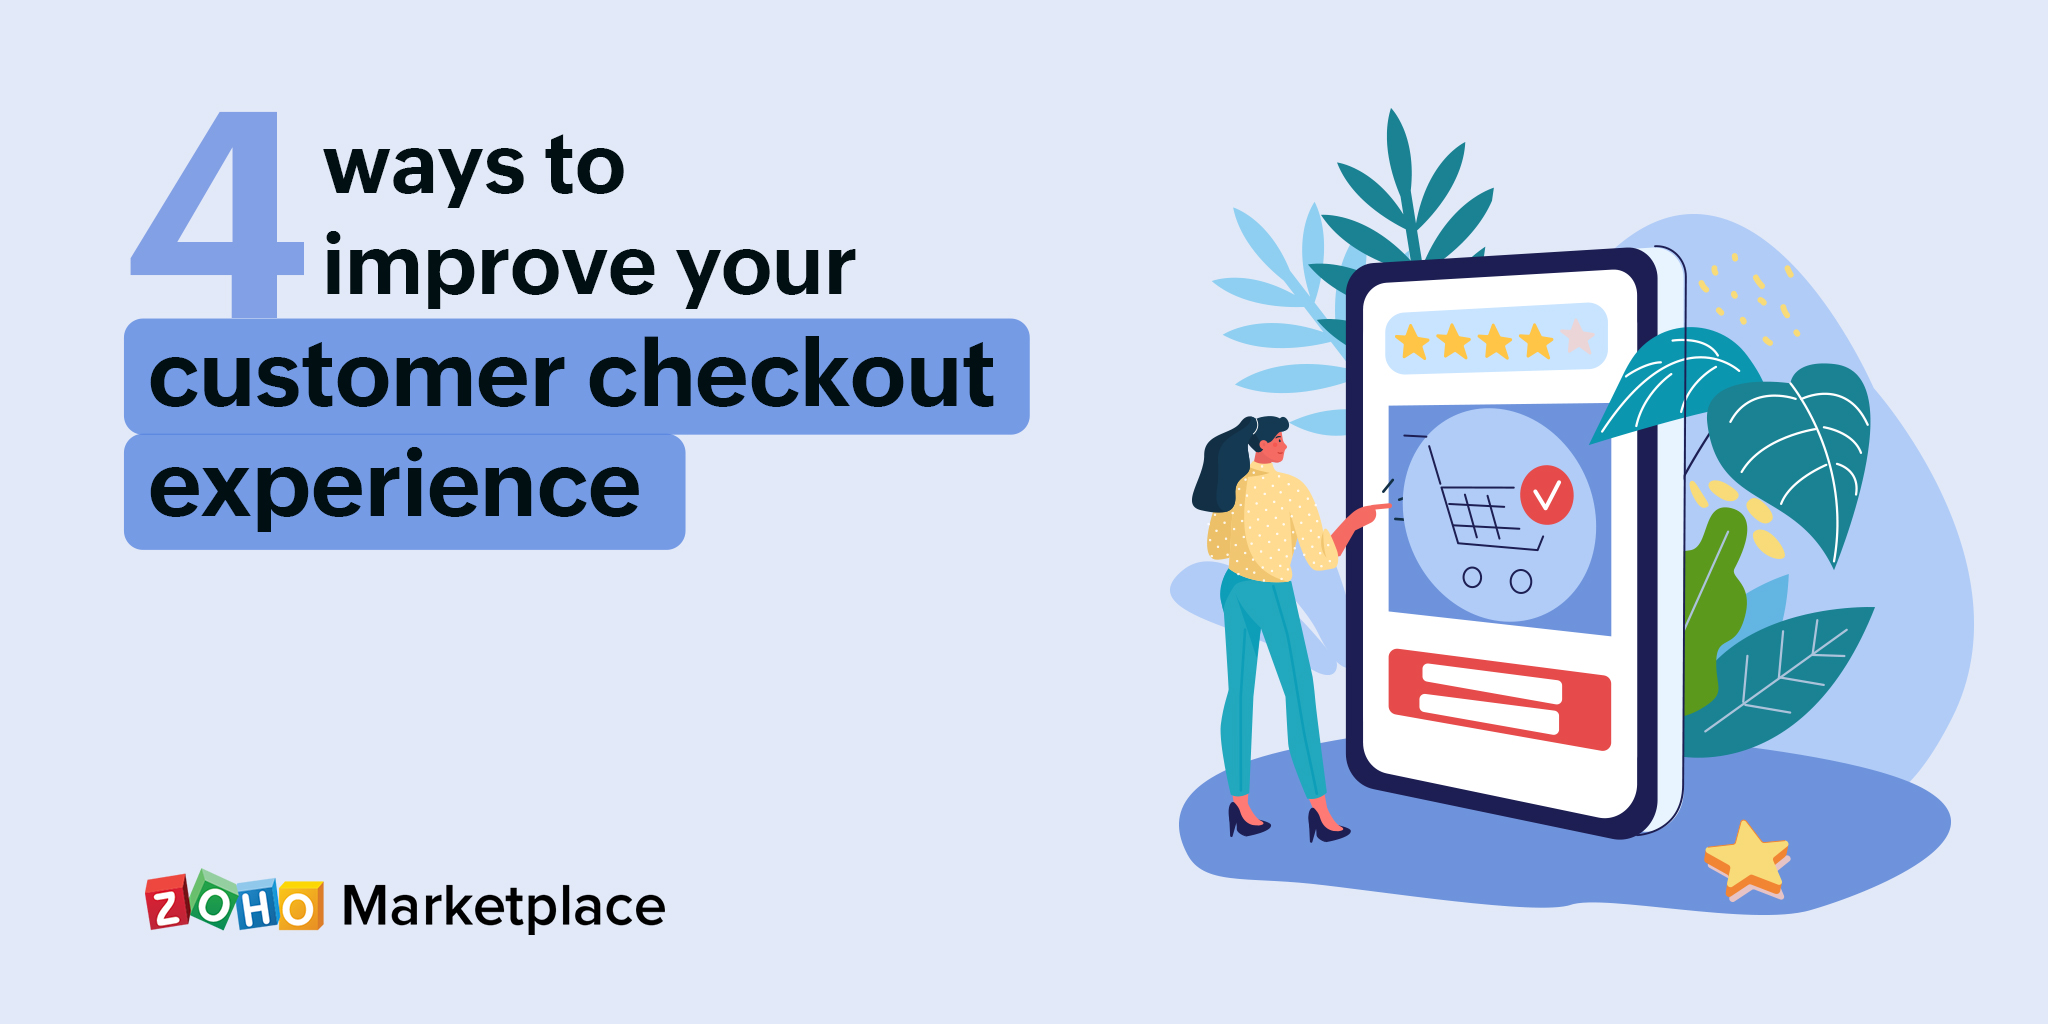 ProTips: 4 ways to improve your customer checkout experience